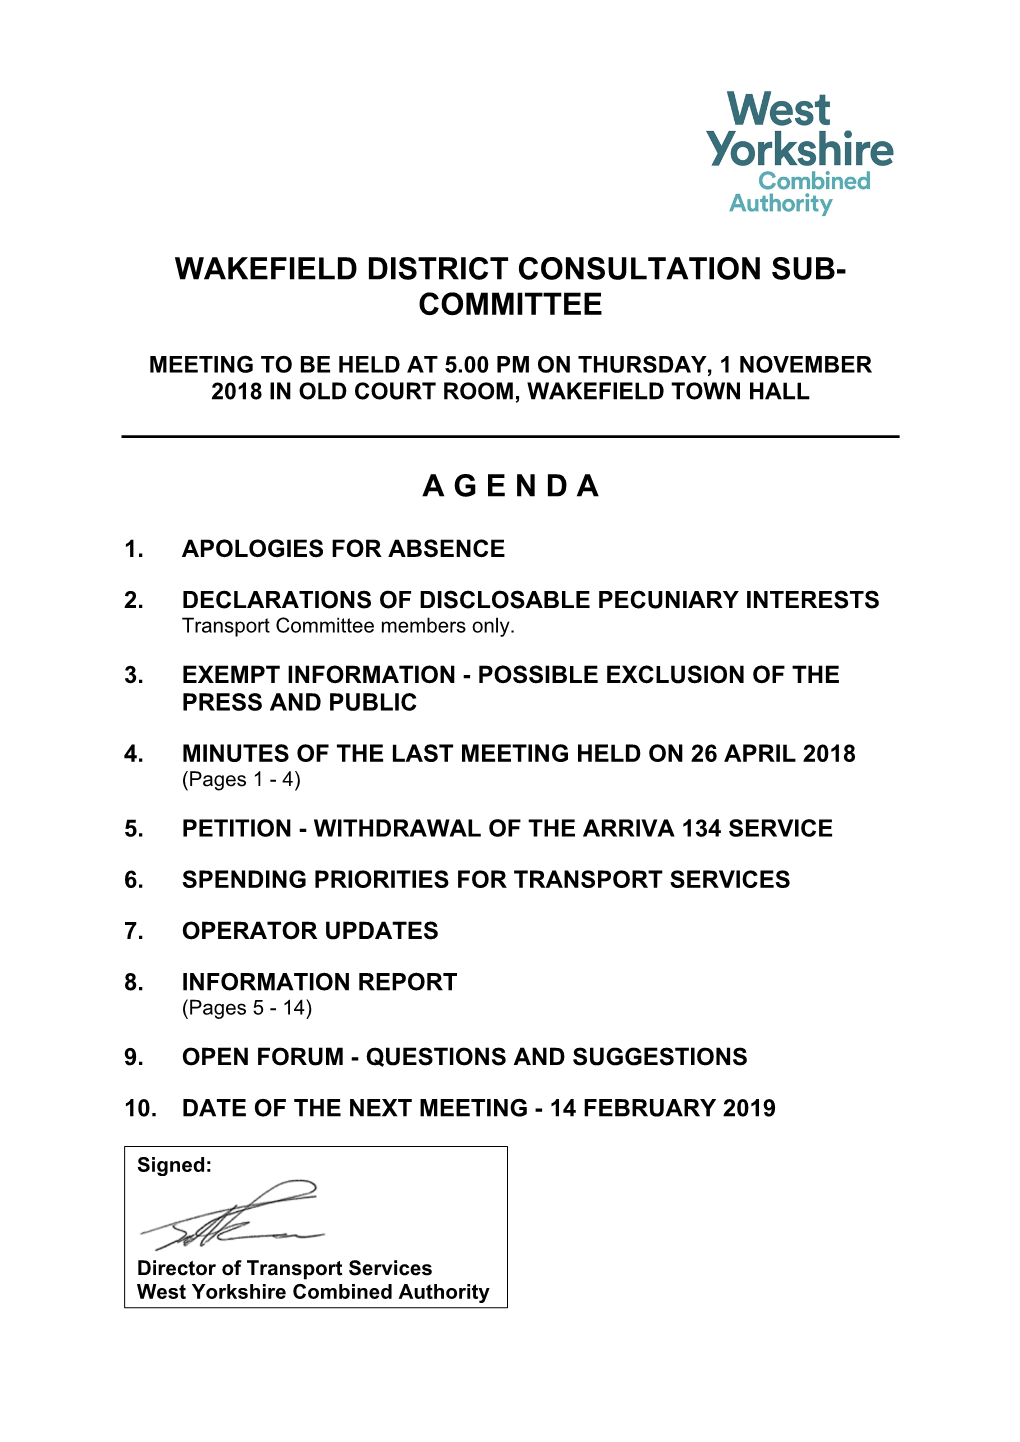 (Public Pack)Agenda Document for Wakefield District Consultation Sub-Committee, 01/11/2018 17:00